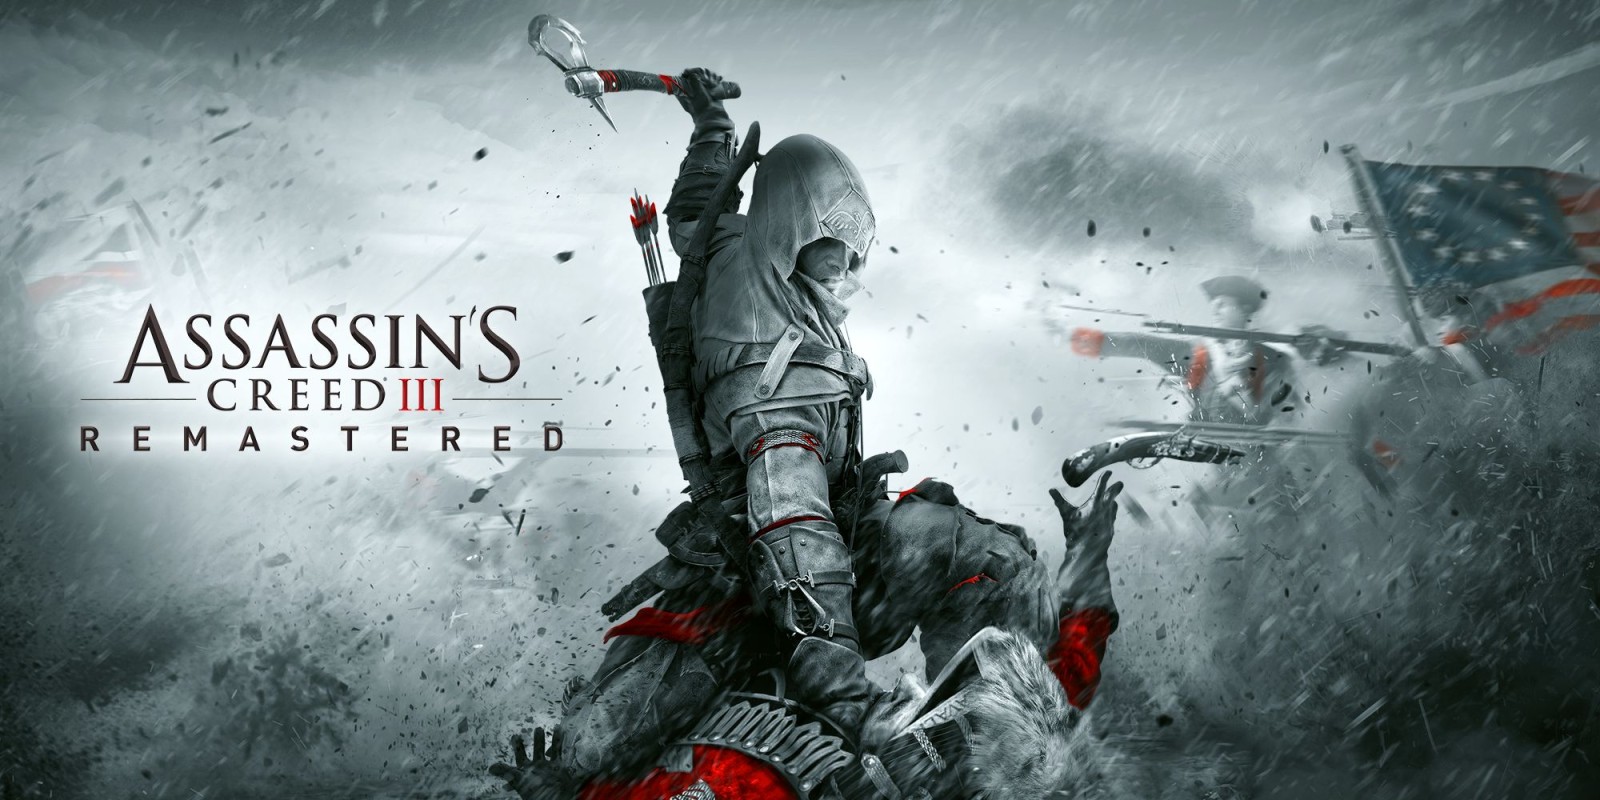 Download Assassins Creed III REMASTERED MULTi8-Ladydarkness